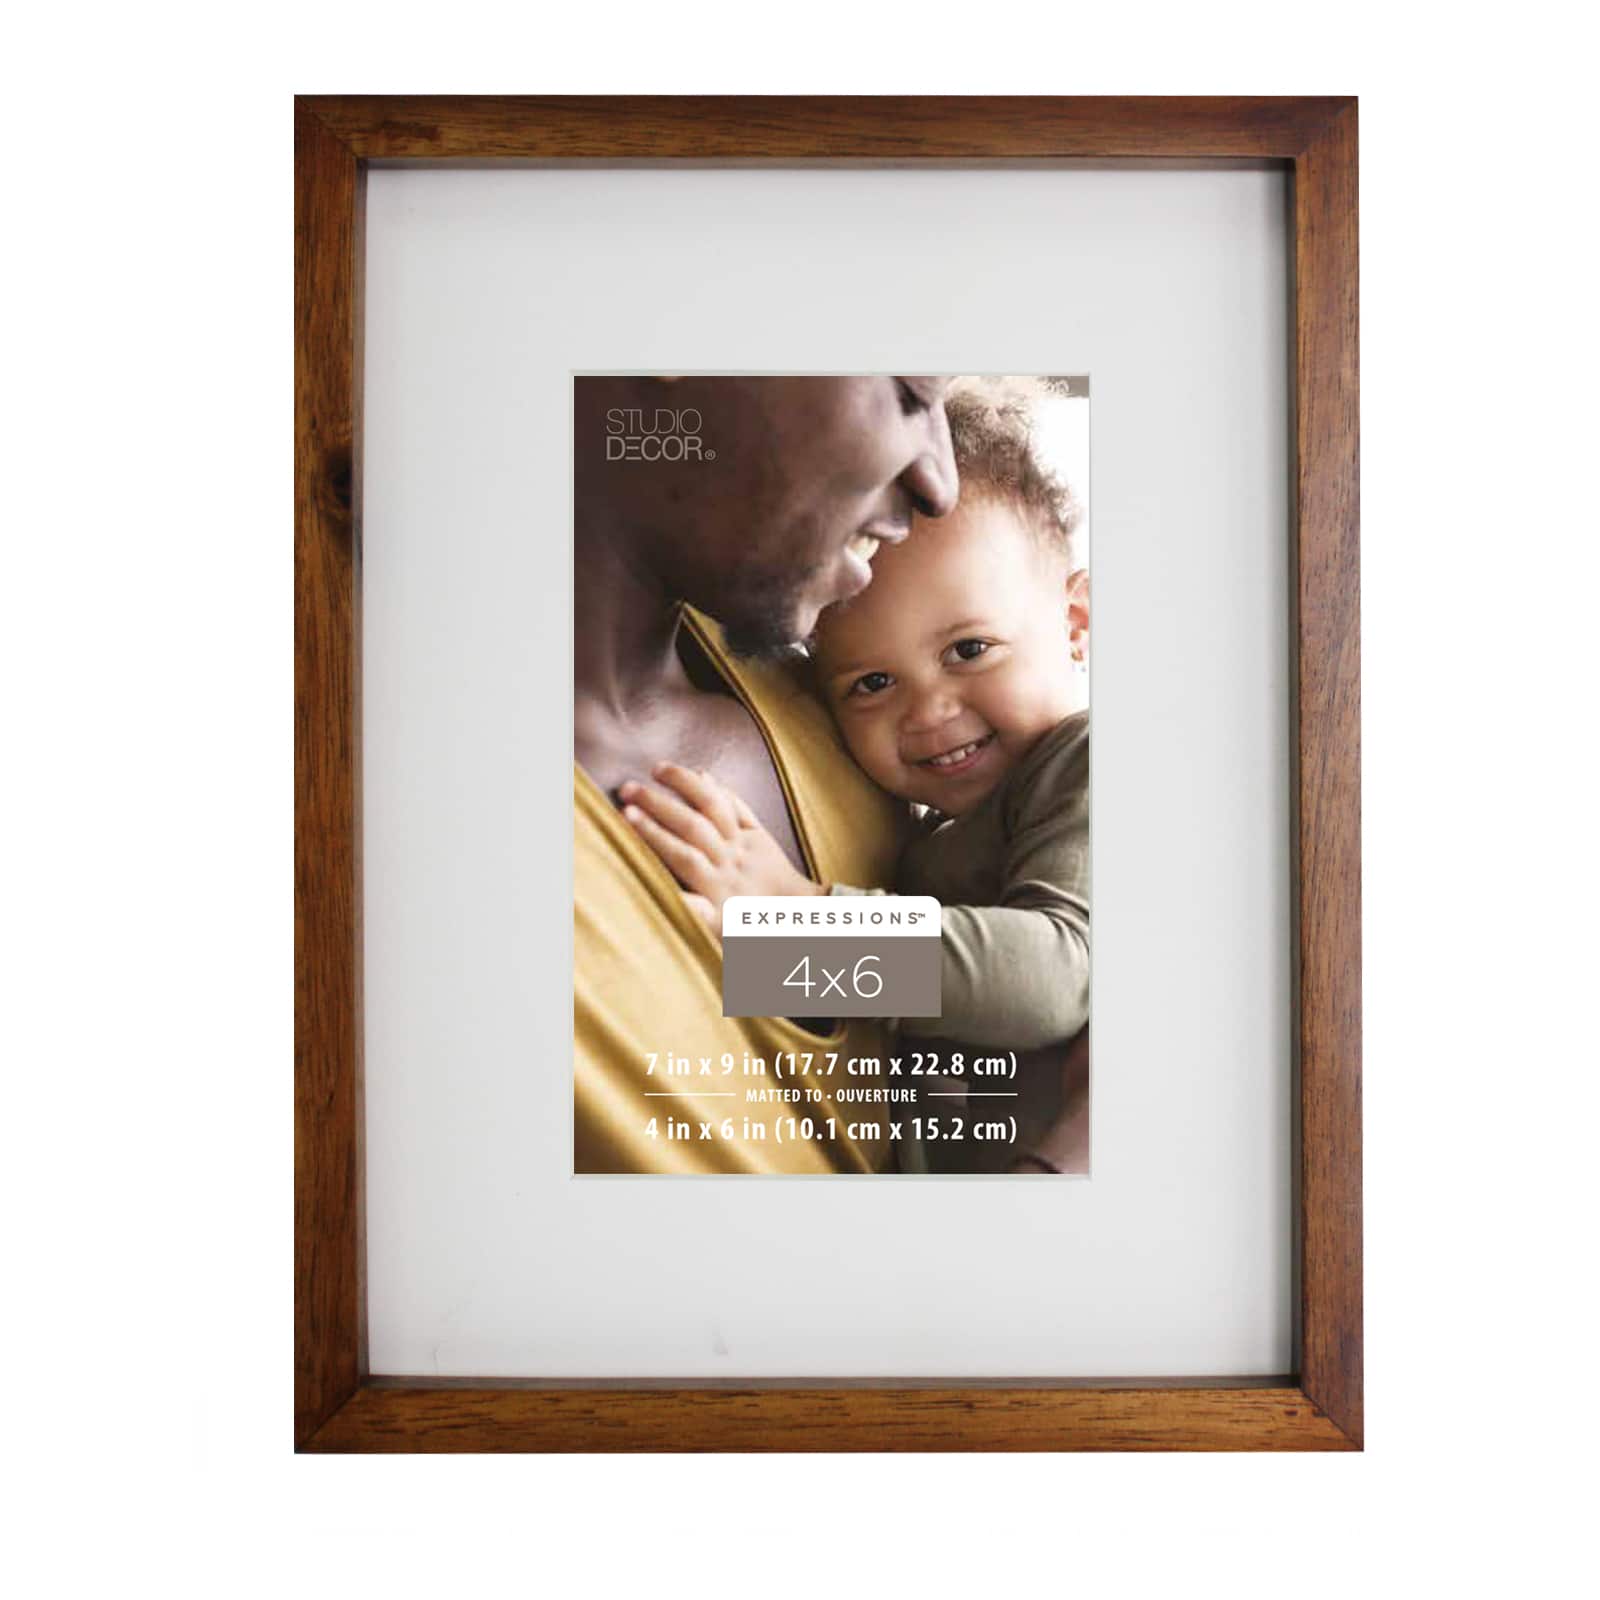 4X6 Picture Frame Set of 2, Small Photo Frames with Walnut Wood